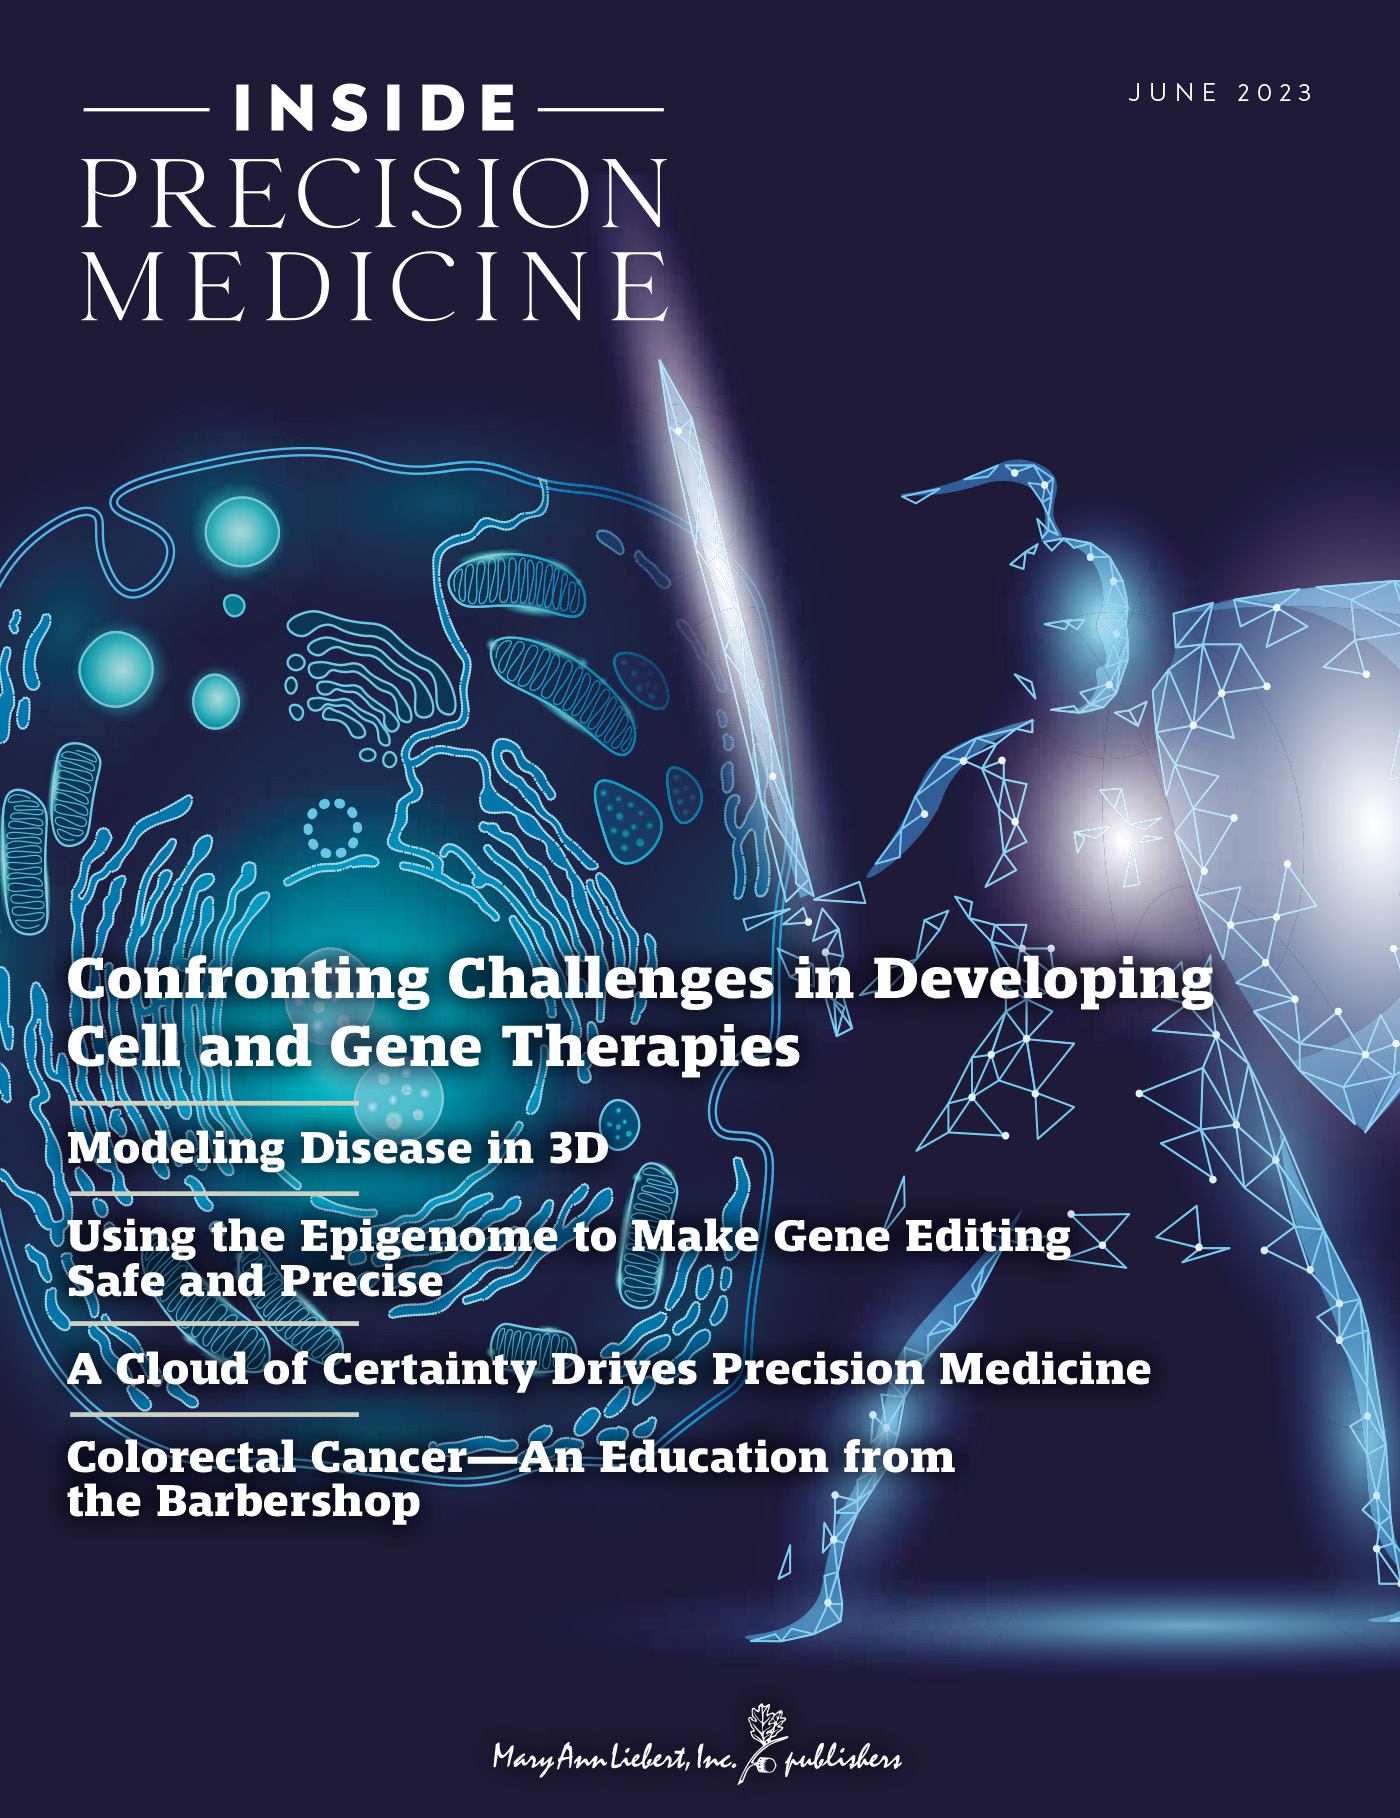  June 2023 issue cover